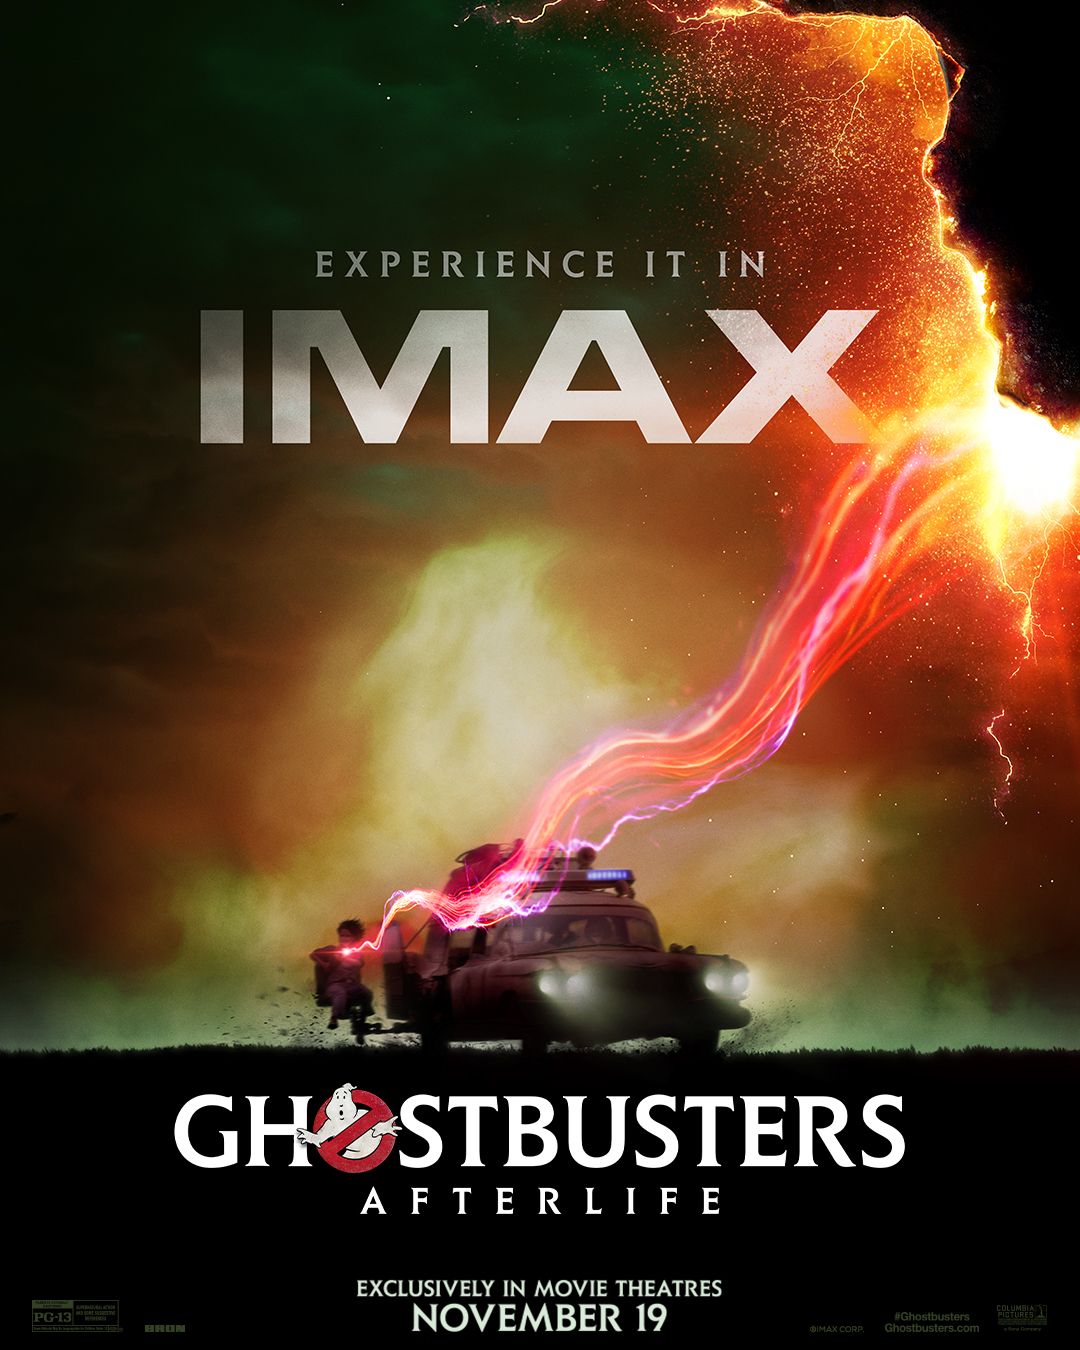 Ghostbusters: Afterlife IMAX Poster Shows Ecto-1 & Proton Pack In Action